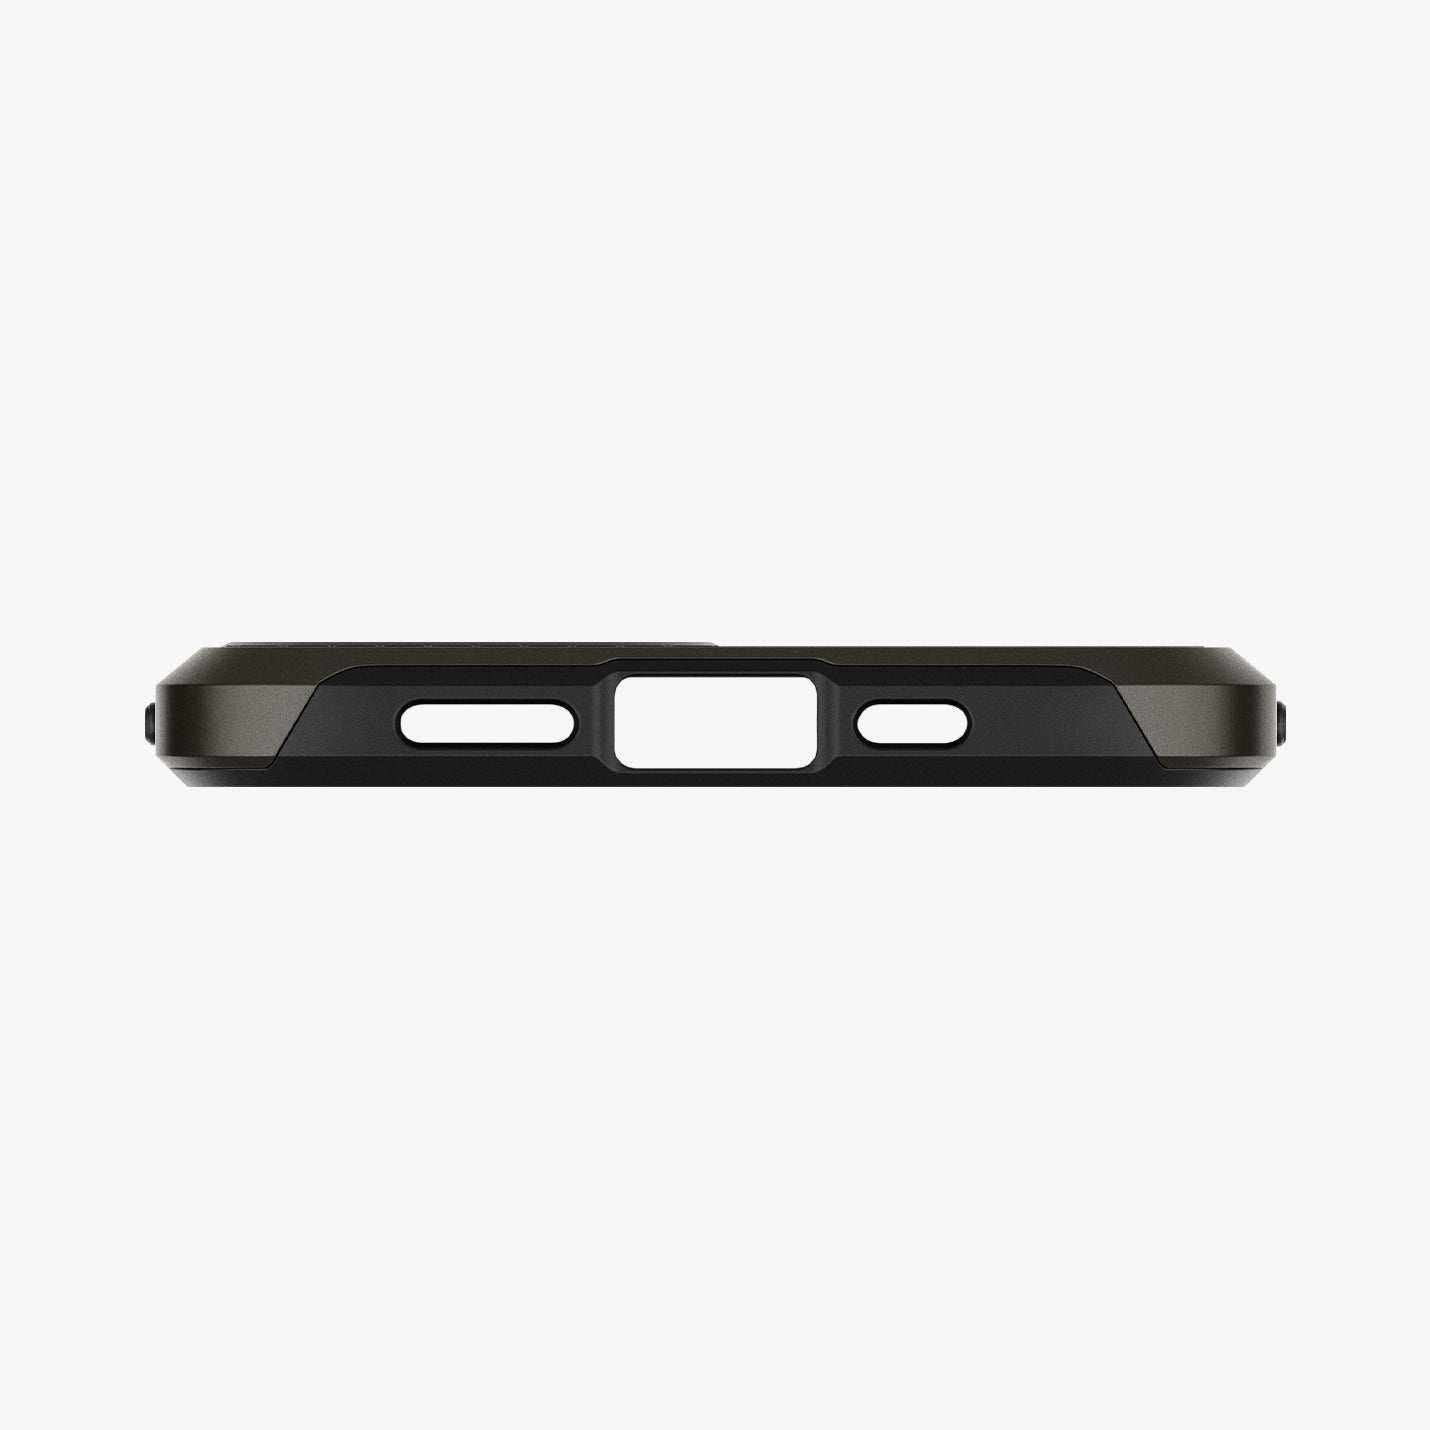 ACS01711 - iPhone 12 / iPhone 12 Pro Case Neo Hybrid in gunmetal showing the bottom with precise cutouts